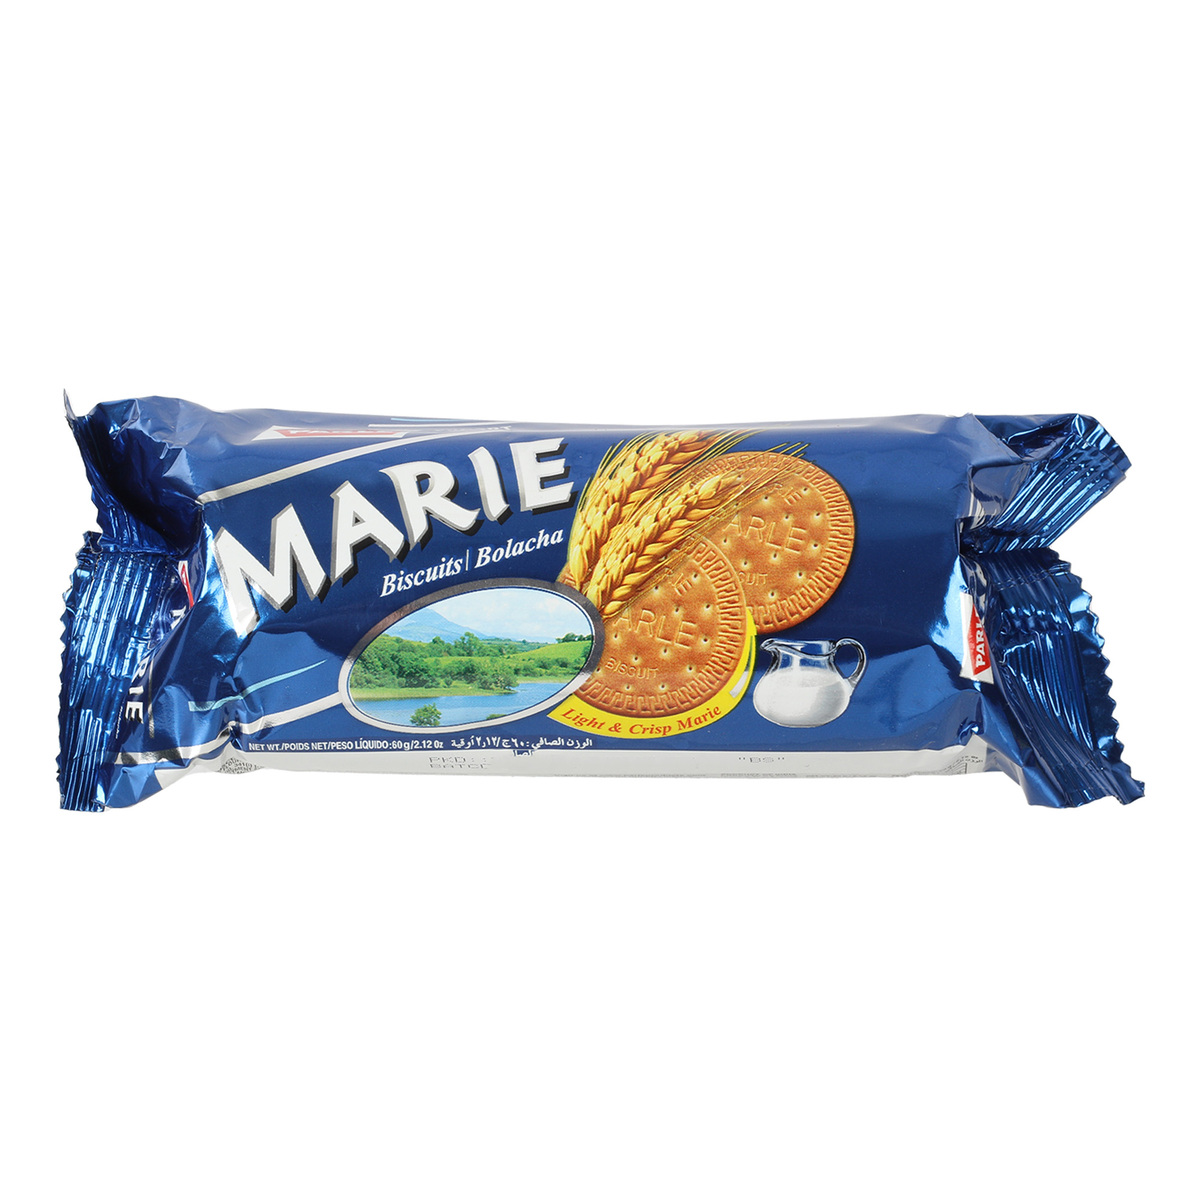 Parle Marie Biscuits 60g